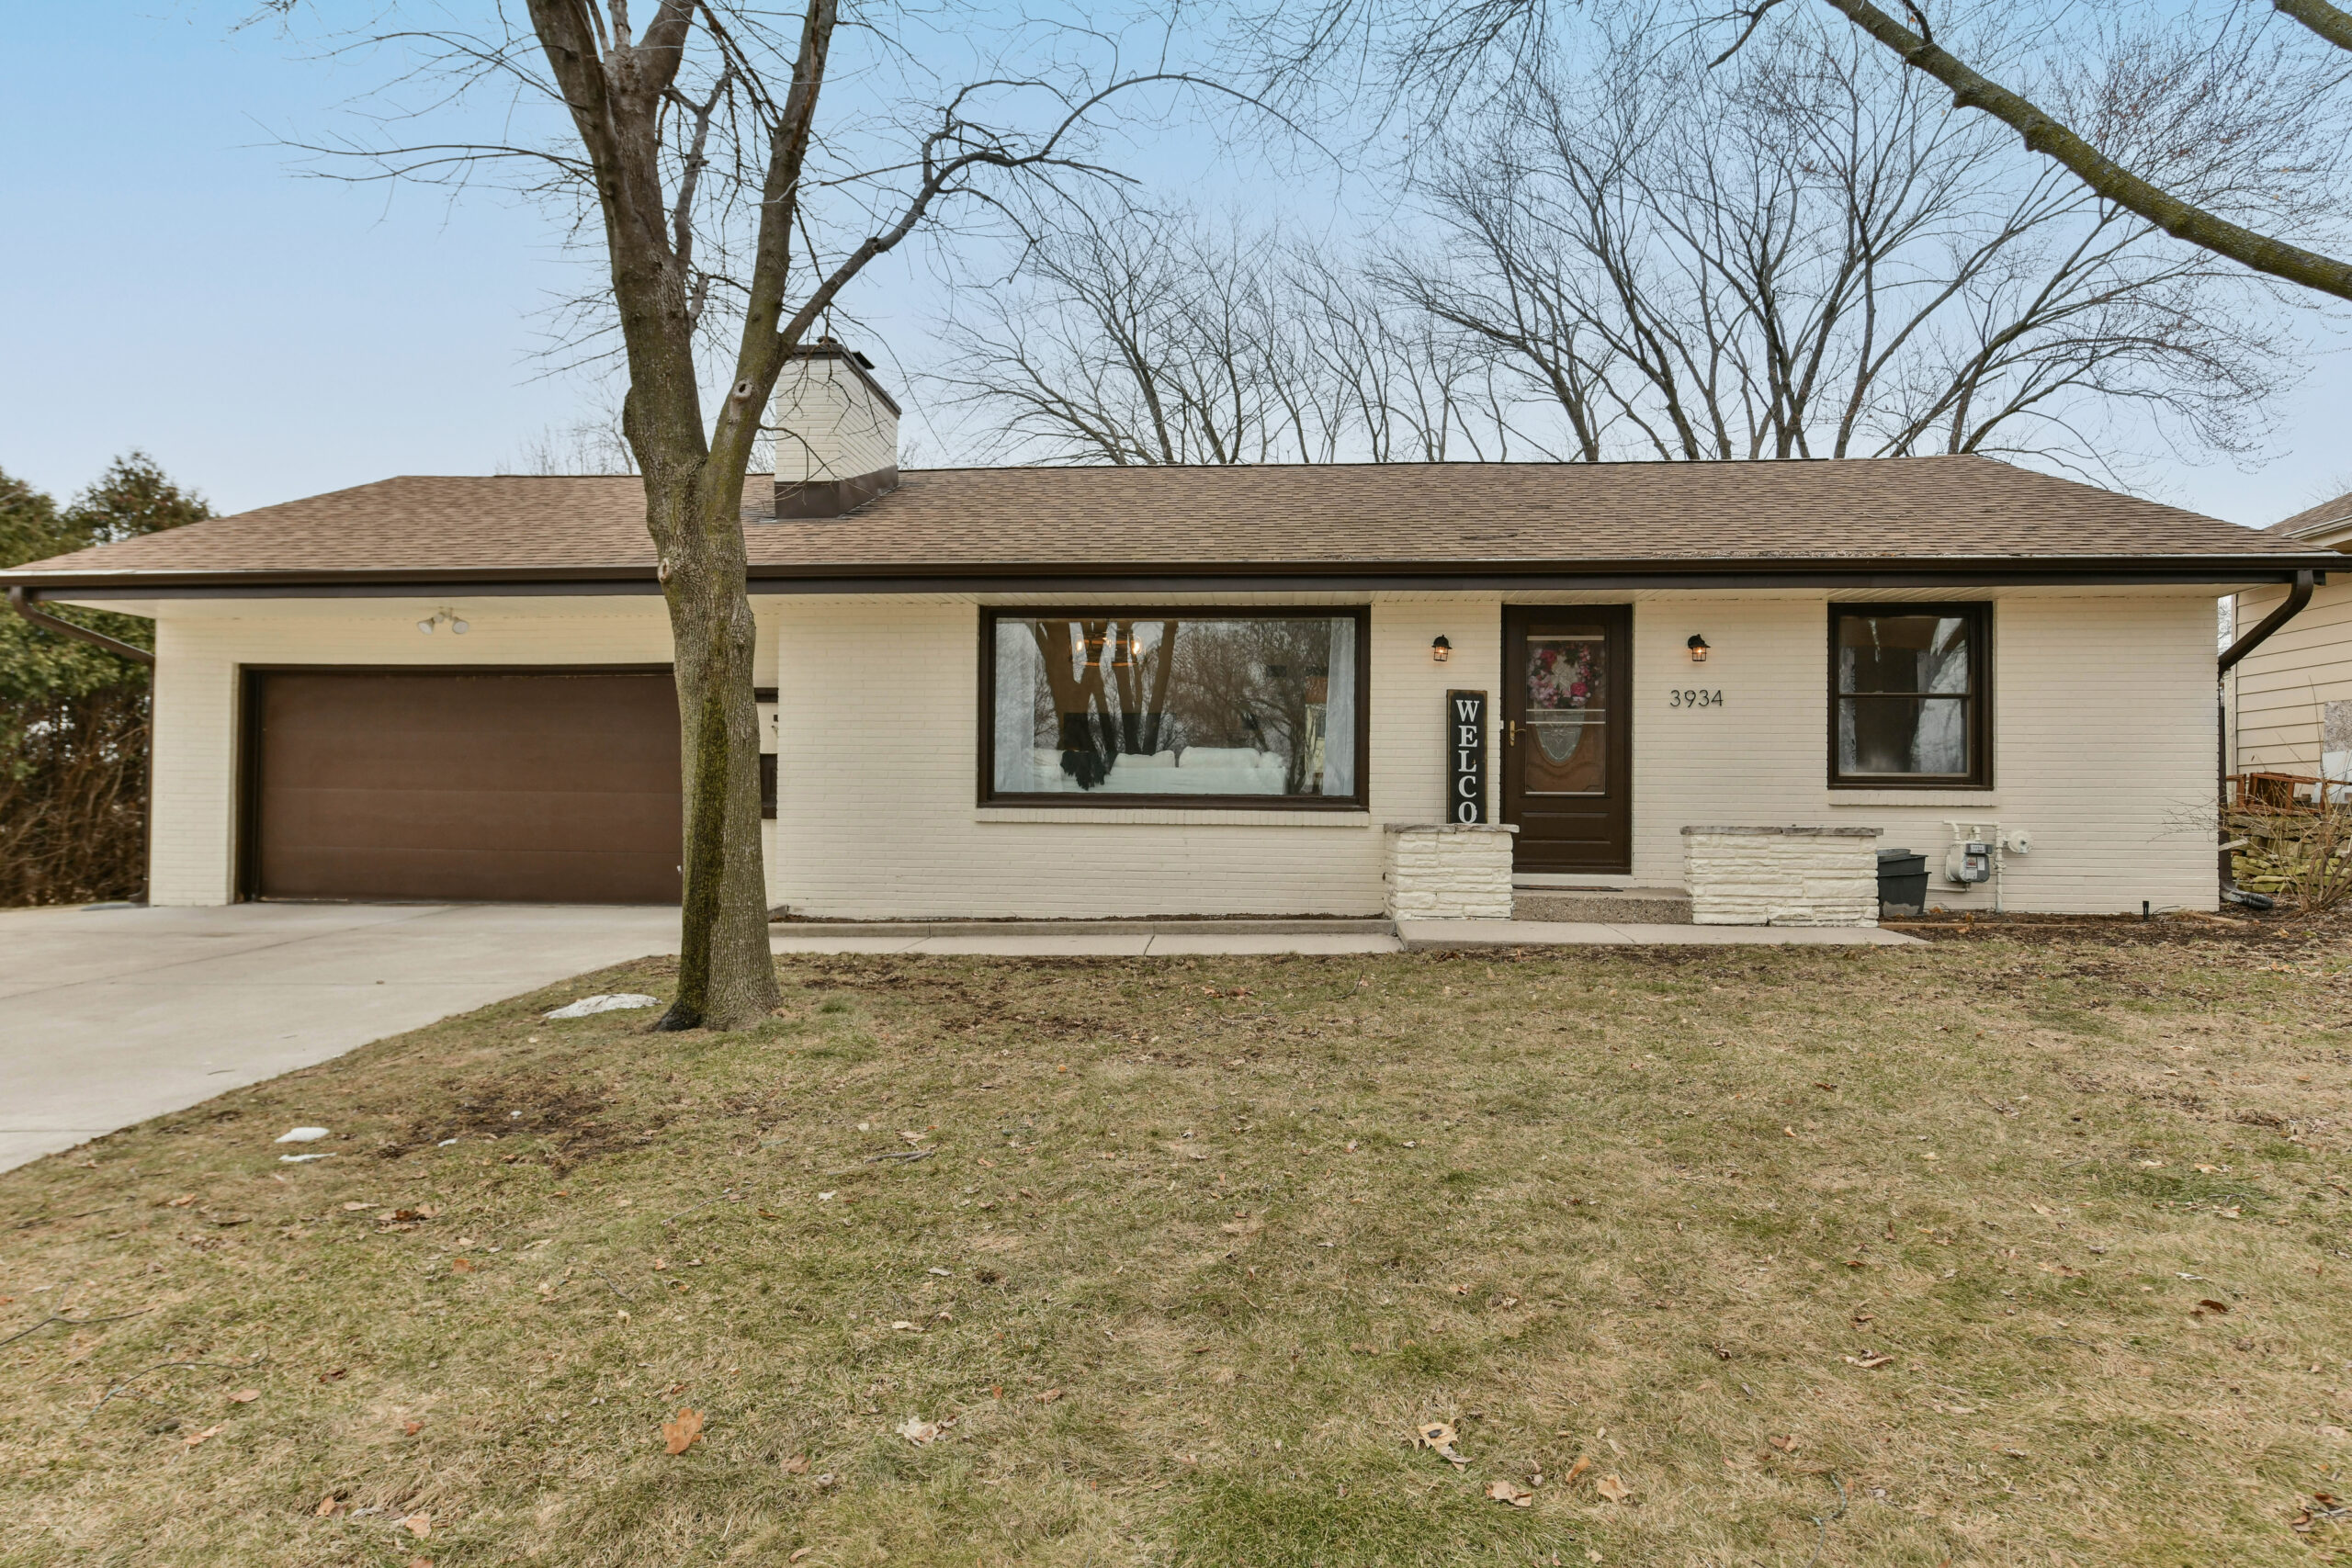  Home for Sale - 3934 N. 102nd St. Wauwatosa, WI 53222-2315